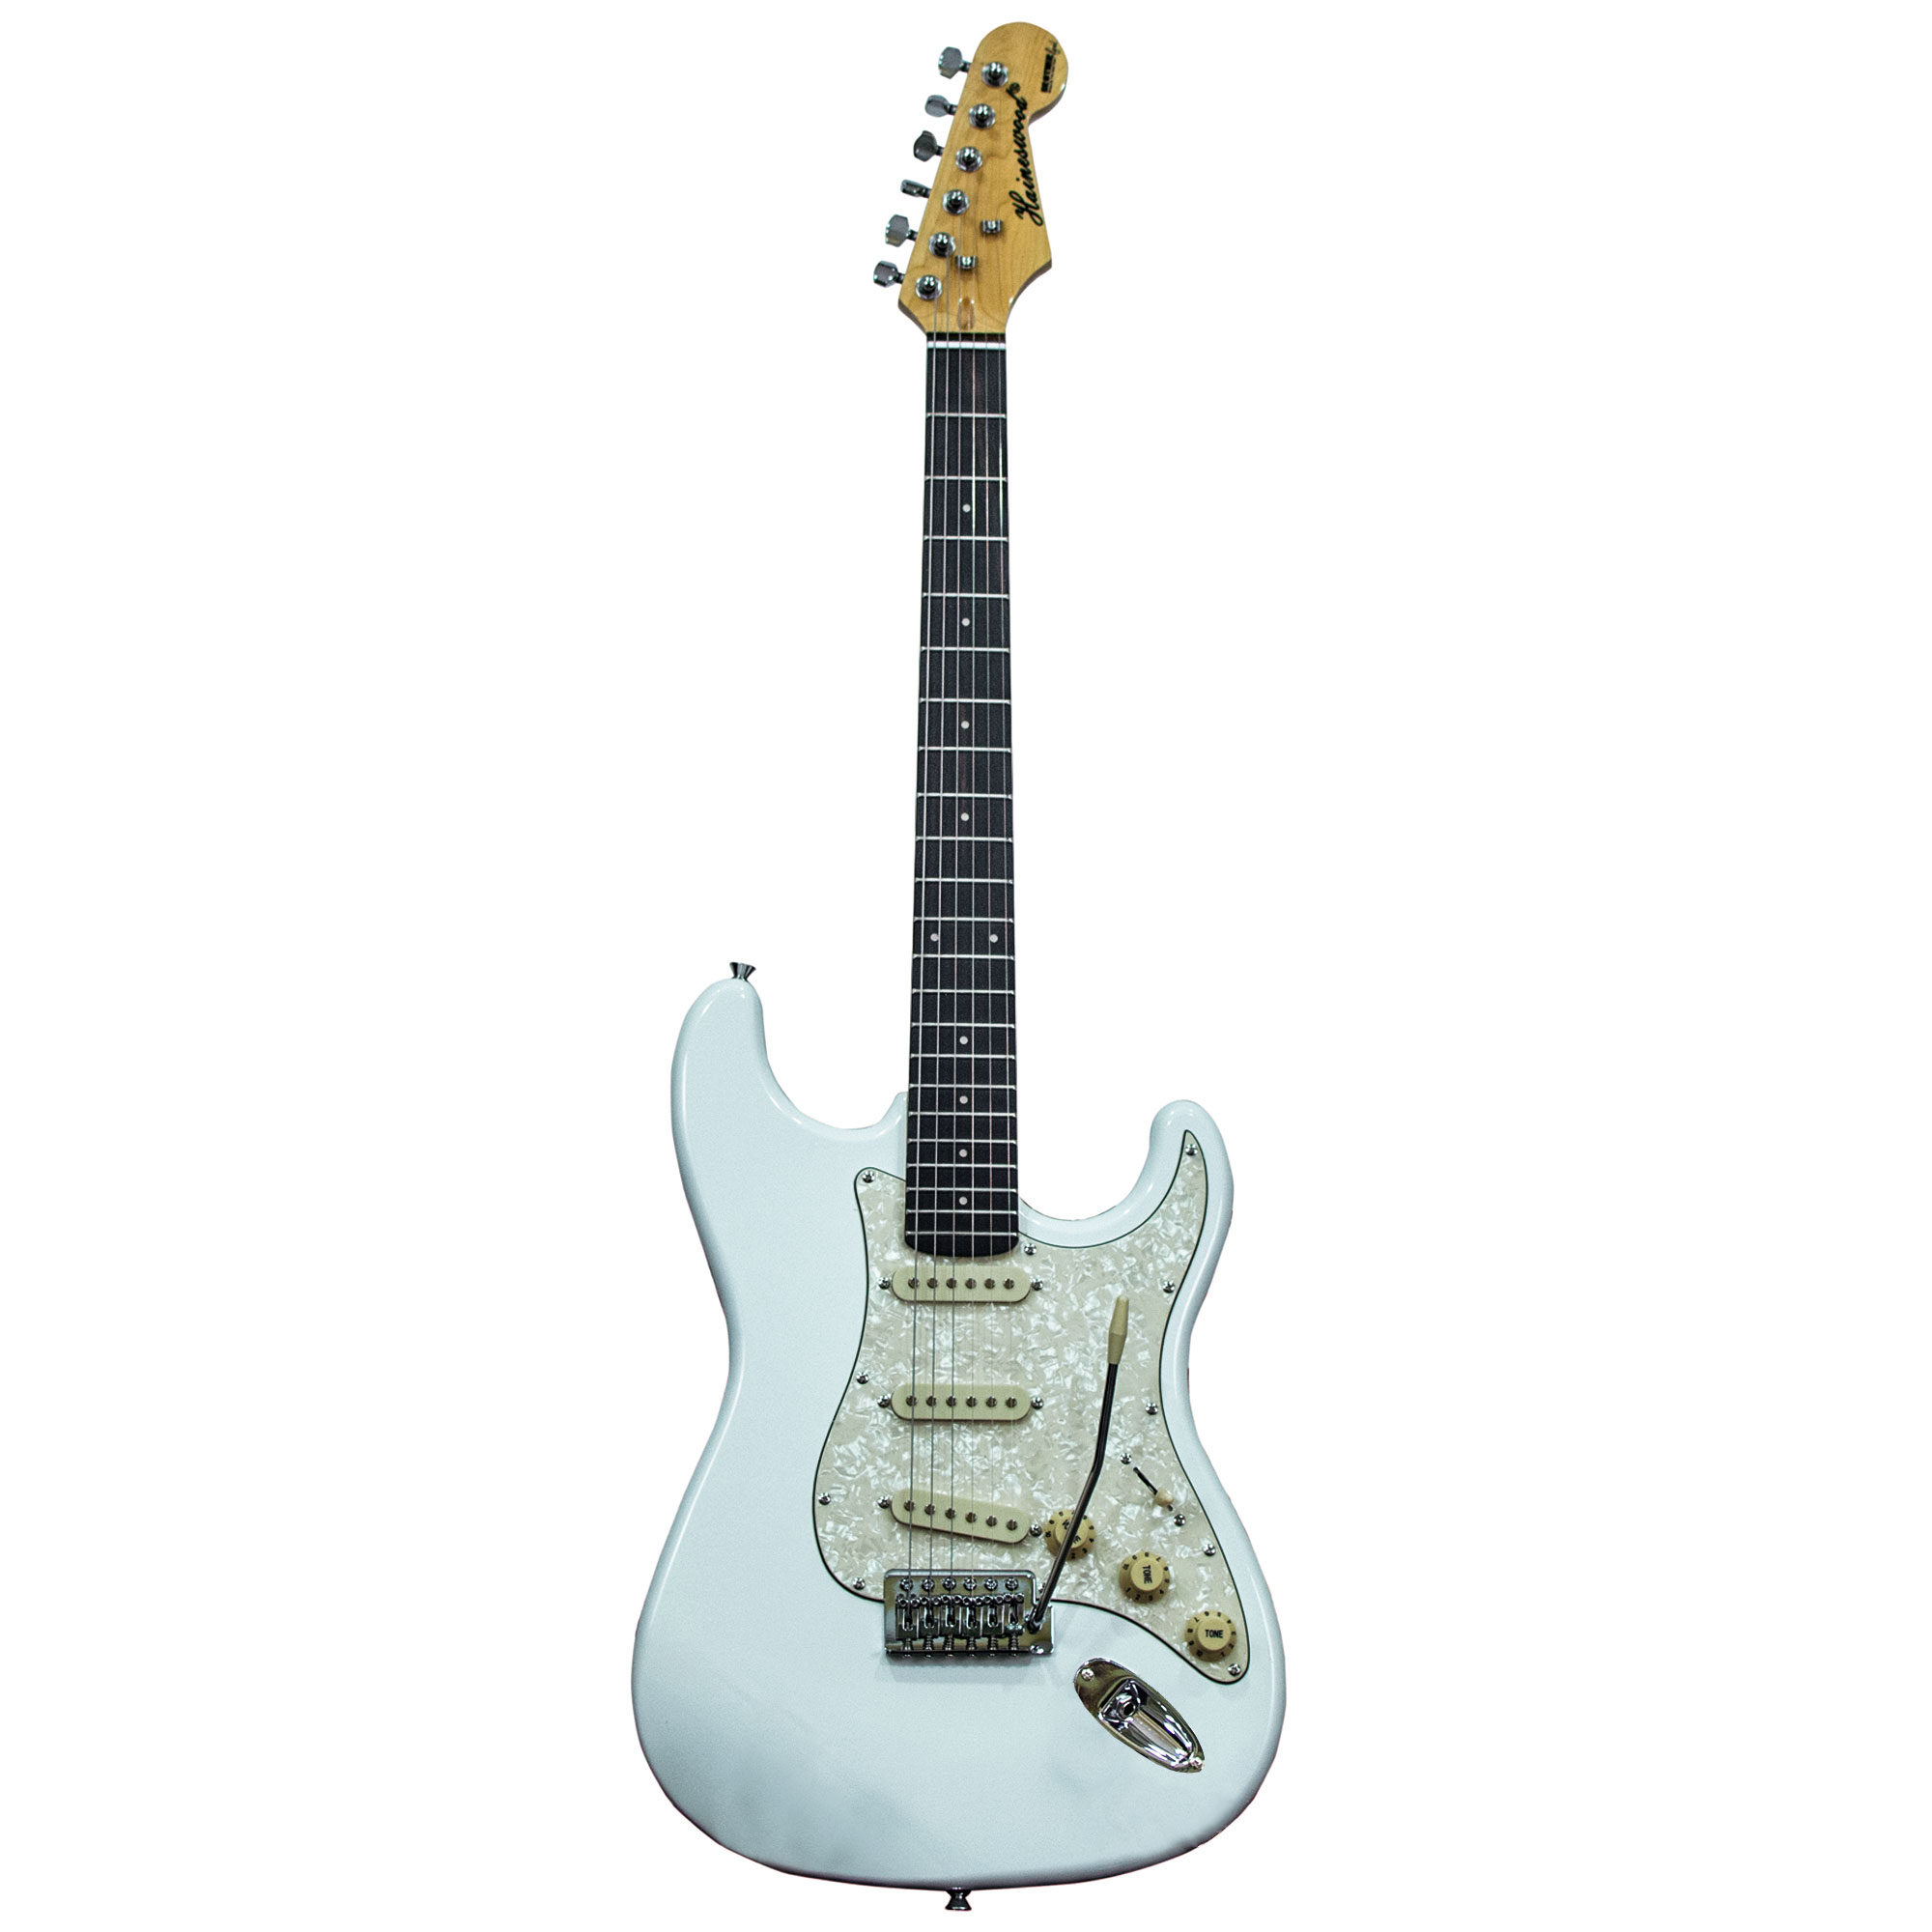 Haineswood Expedition Series ST-E-WH Strat Electric Guitar (White)